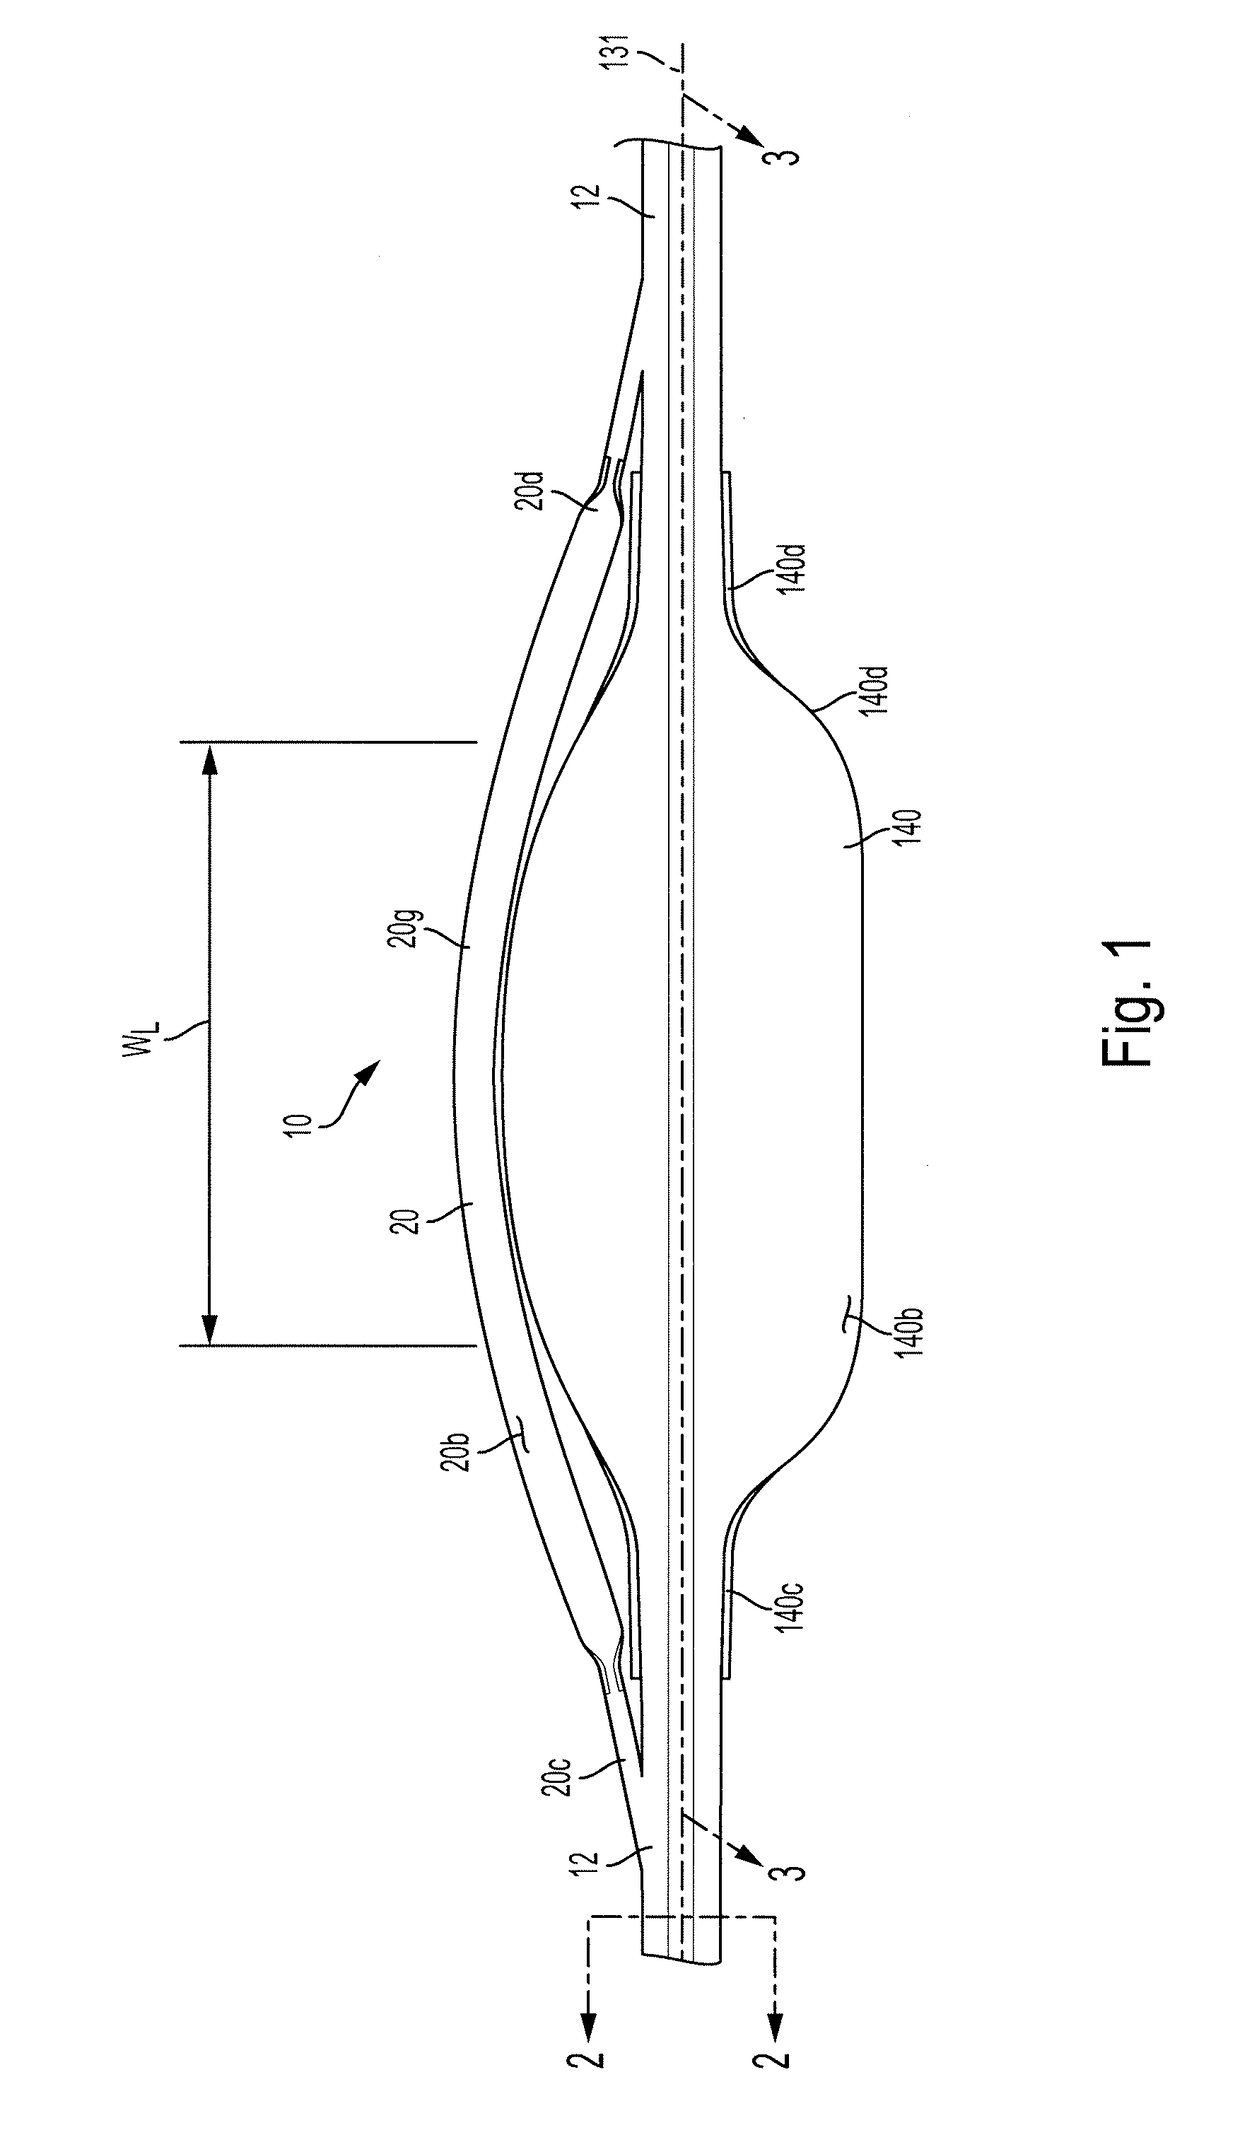 System and method for low profile occlusion balloon catheter